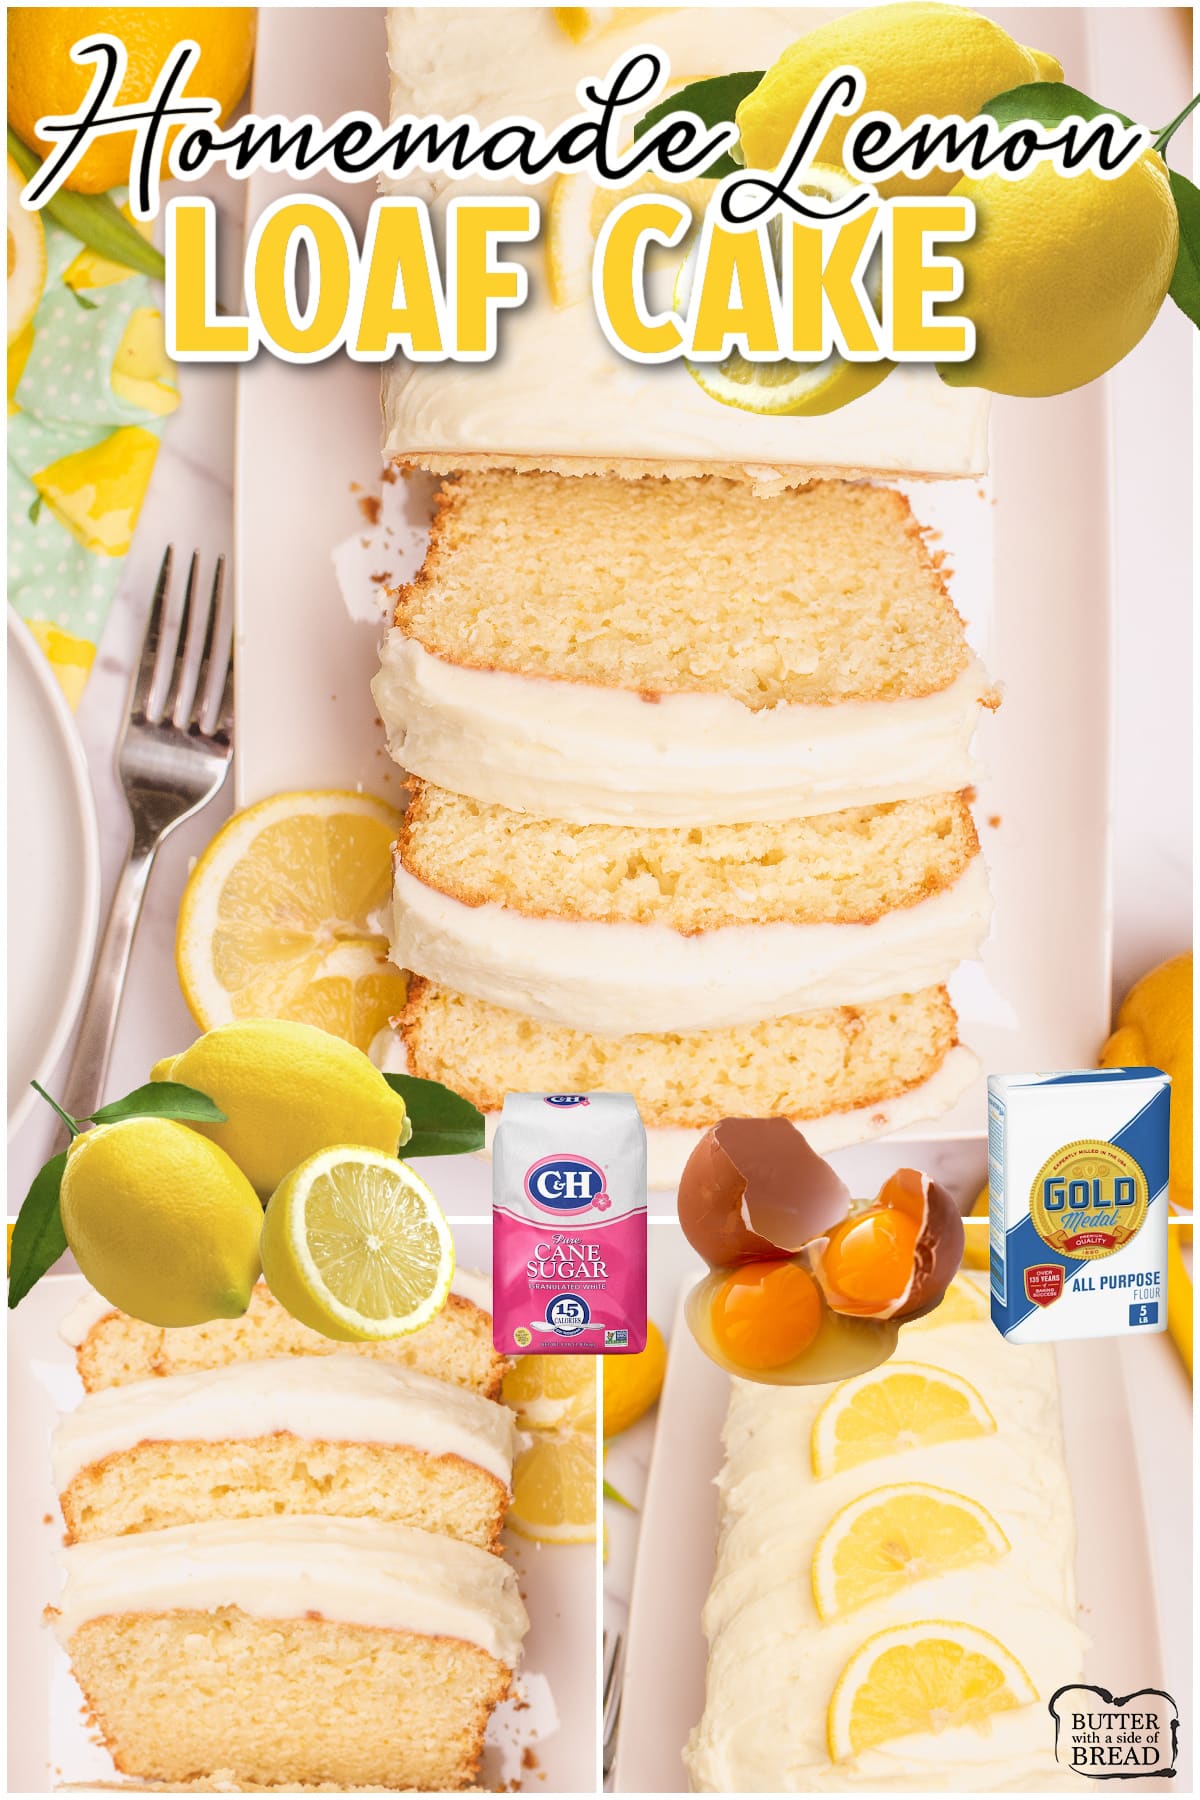 Iced Lemon Loaf is made with fresh lemon, sour cream, olive oil & sugar for a perfectly moist lemon bread! It's sure to bring you a little bit of sunshine with every bite!